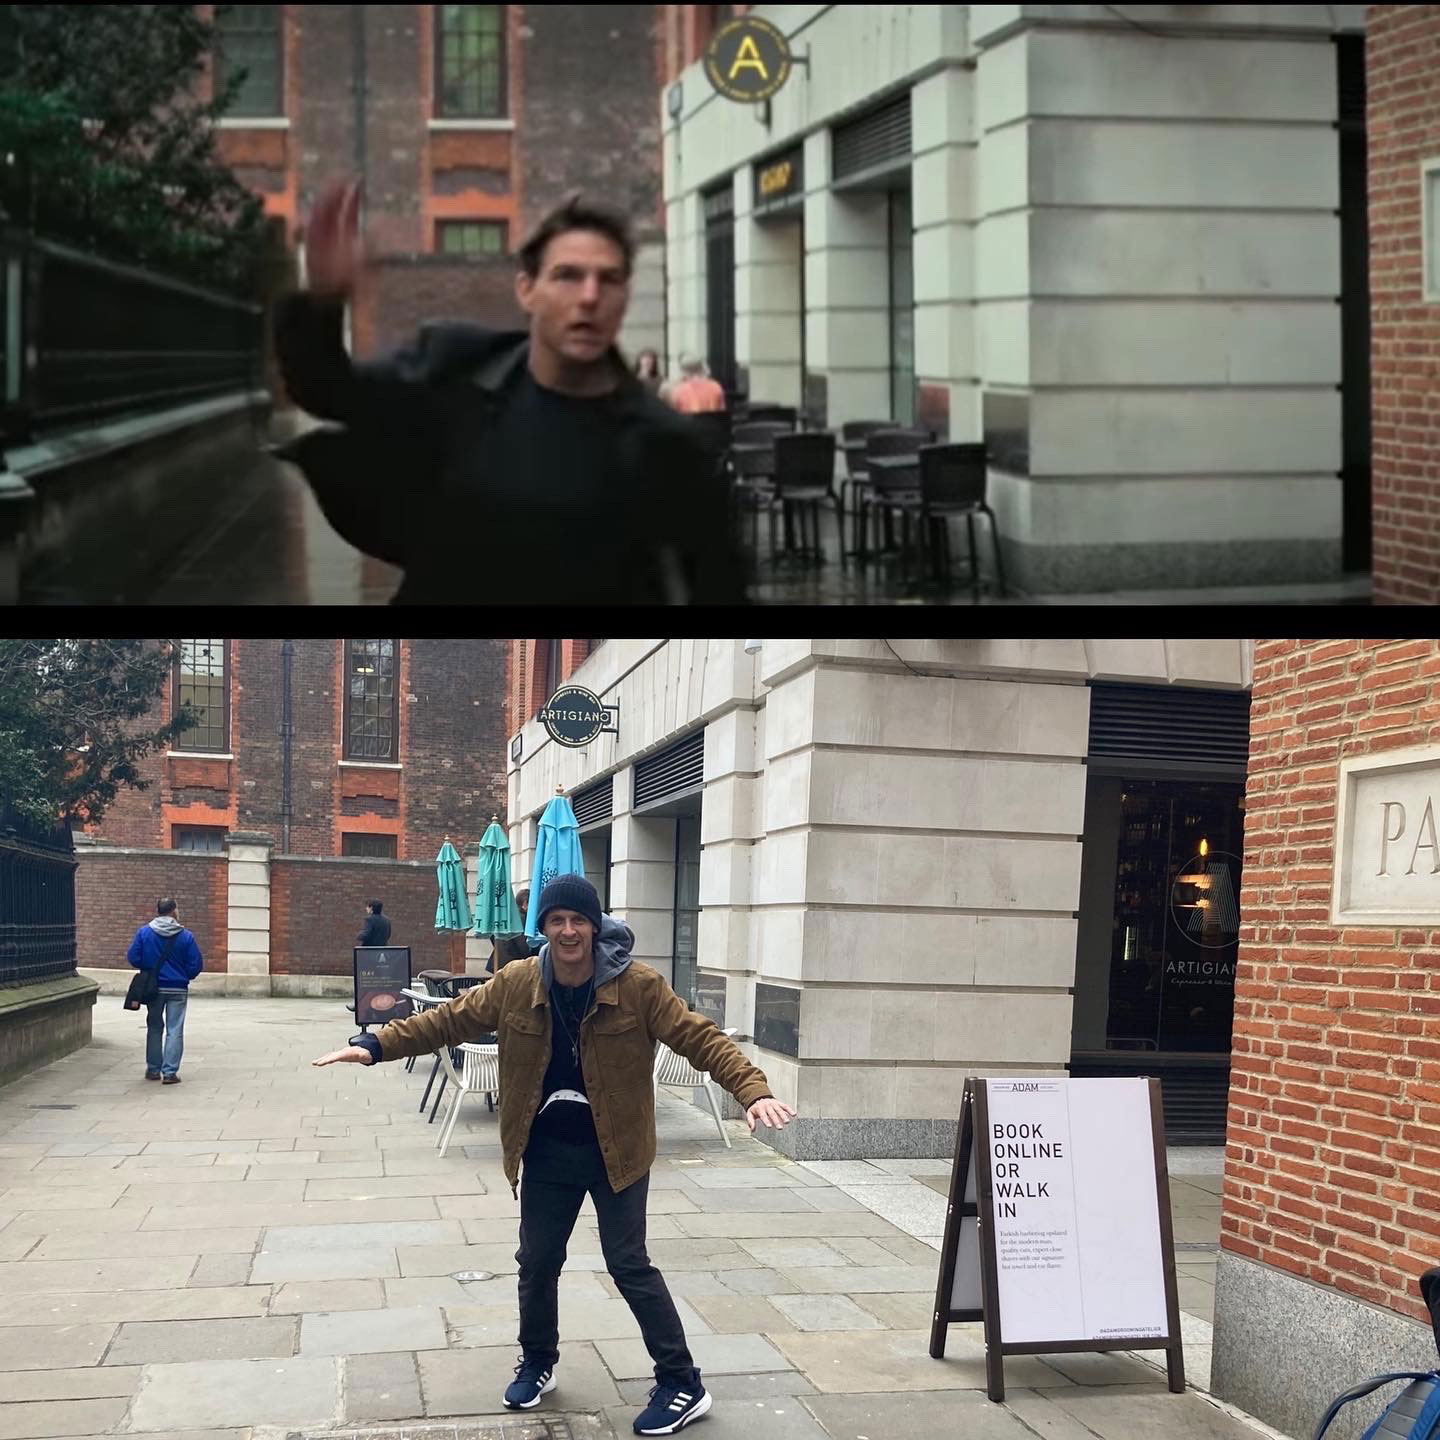 Mission Impossible Fallout London Location 